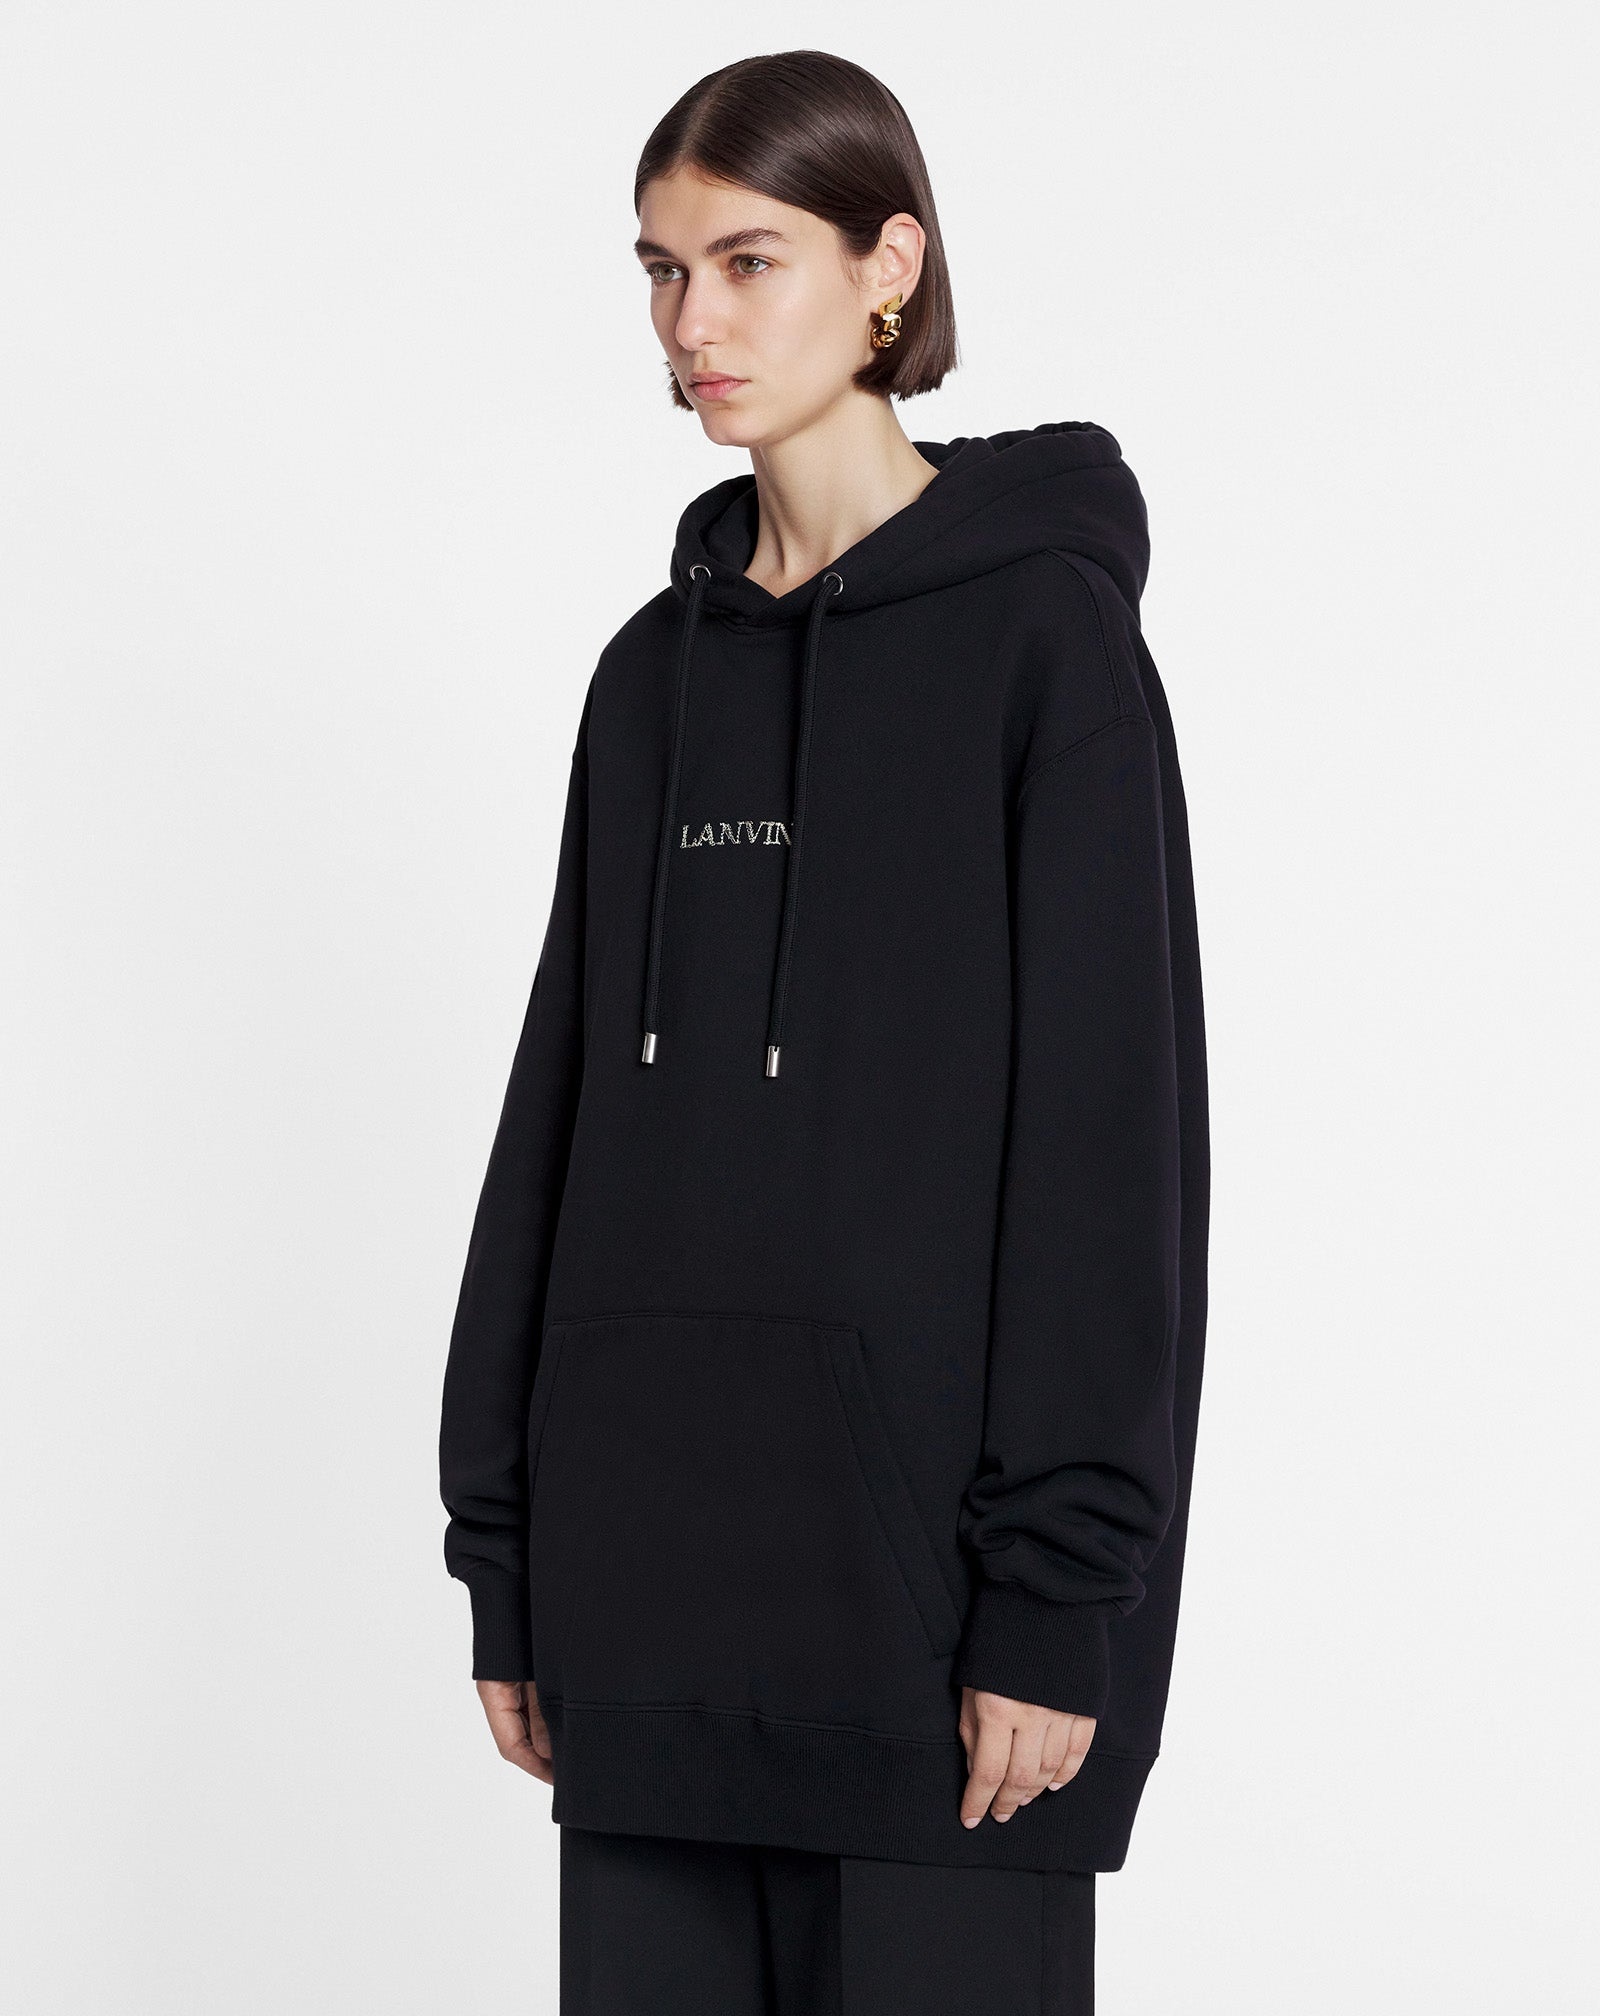 LOOSE-FITTING HOODIE WITH LANVIN LOGO - 4